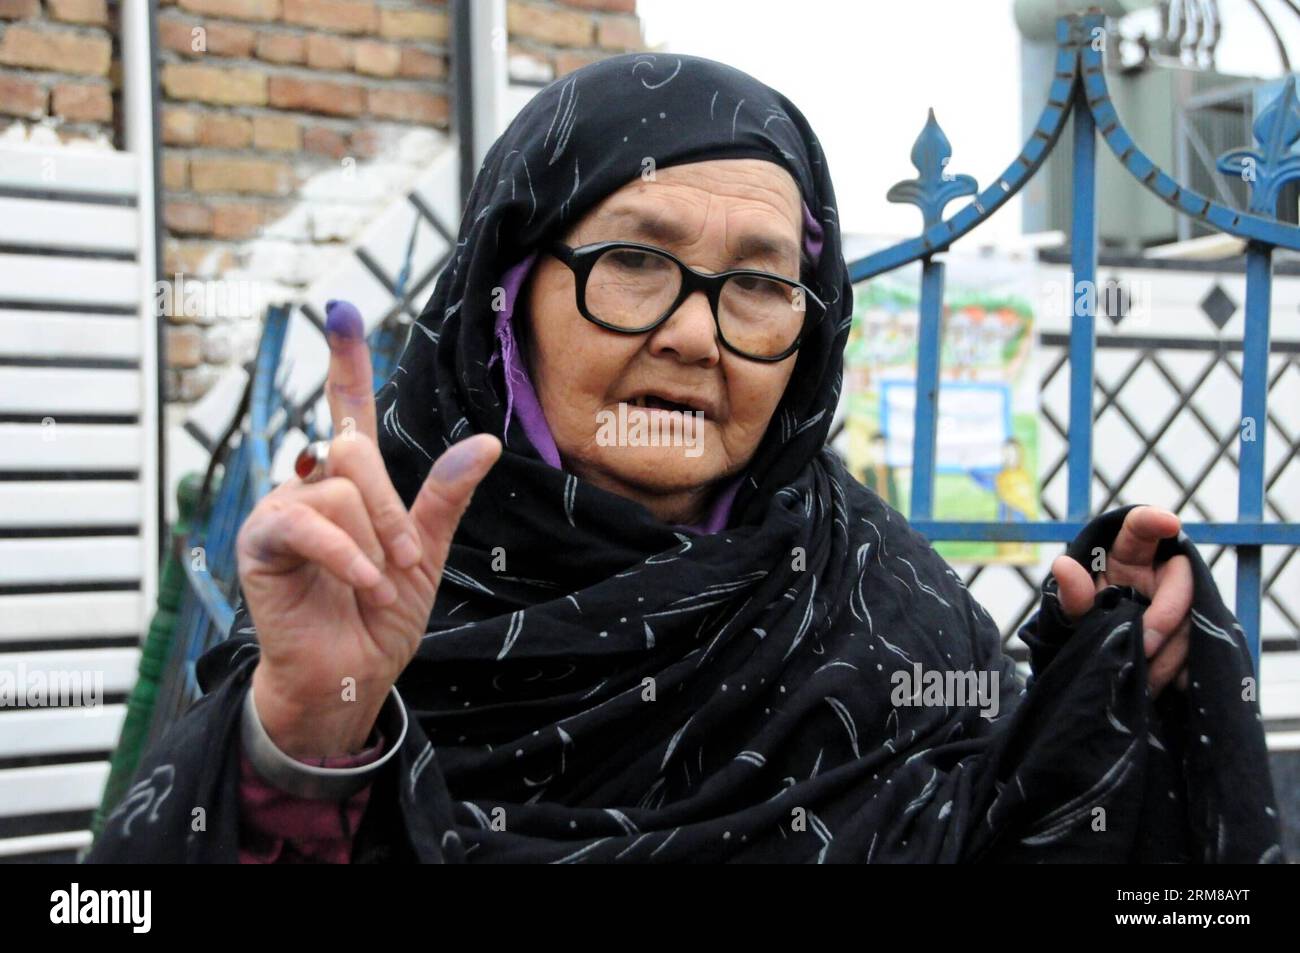 An Afghan woman shows her inked finger after casting her ballot at a polling center in Kabul, Afghanistan, on April 5, 2014. The polling for Afghanistan s presidential election concluded on Saturday and counting of ballots has begun, the country s election officials said. A total of 6,218 polling centers remained open on the election day and around 7 million eligible voters, 36 percent of them women, had cast their votes. (Xinhua/Omid) AFGHANISTAN-PRESIDENTIAL ELECTION-BALLOTING-CONCLUSION PUBLICATIONxNOTxINxCHN   to Afghan Woman Shows her inked Fingers After Casting her Ballot AT a Polling Ce Stock Photo